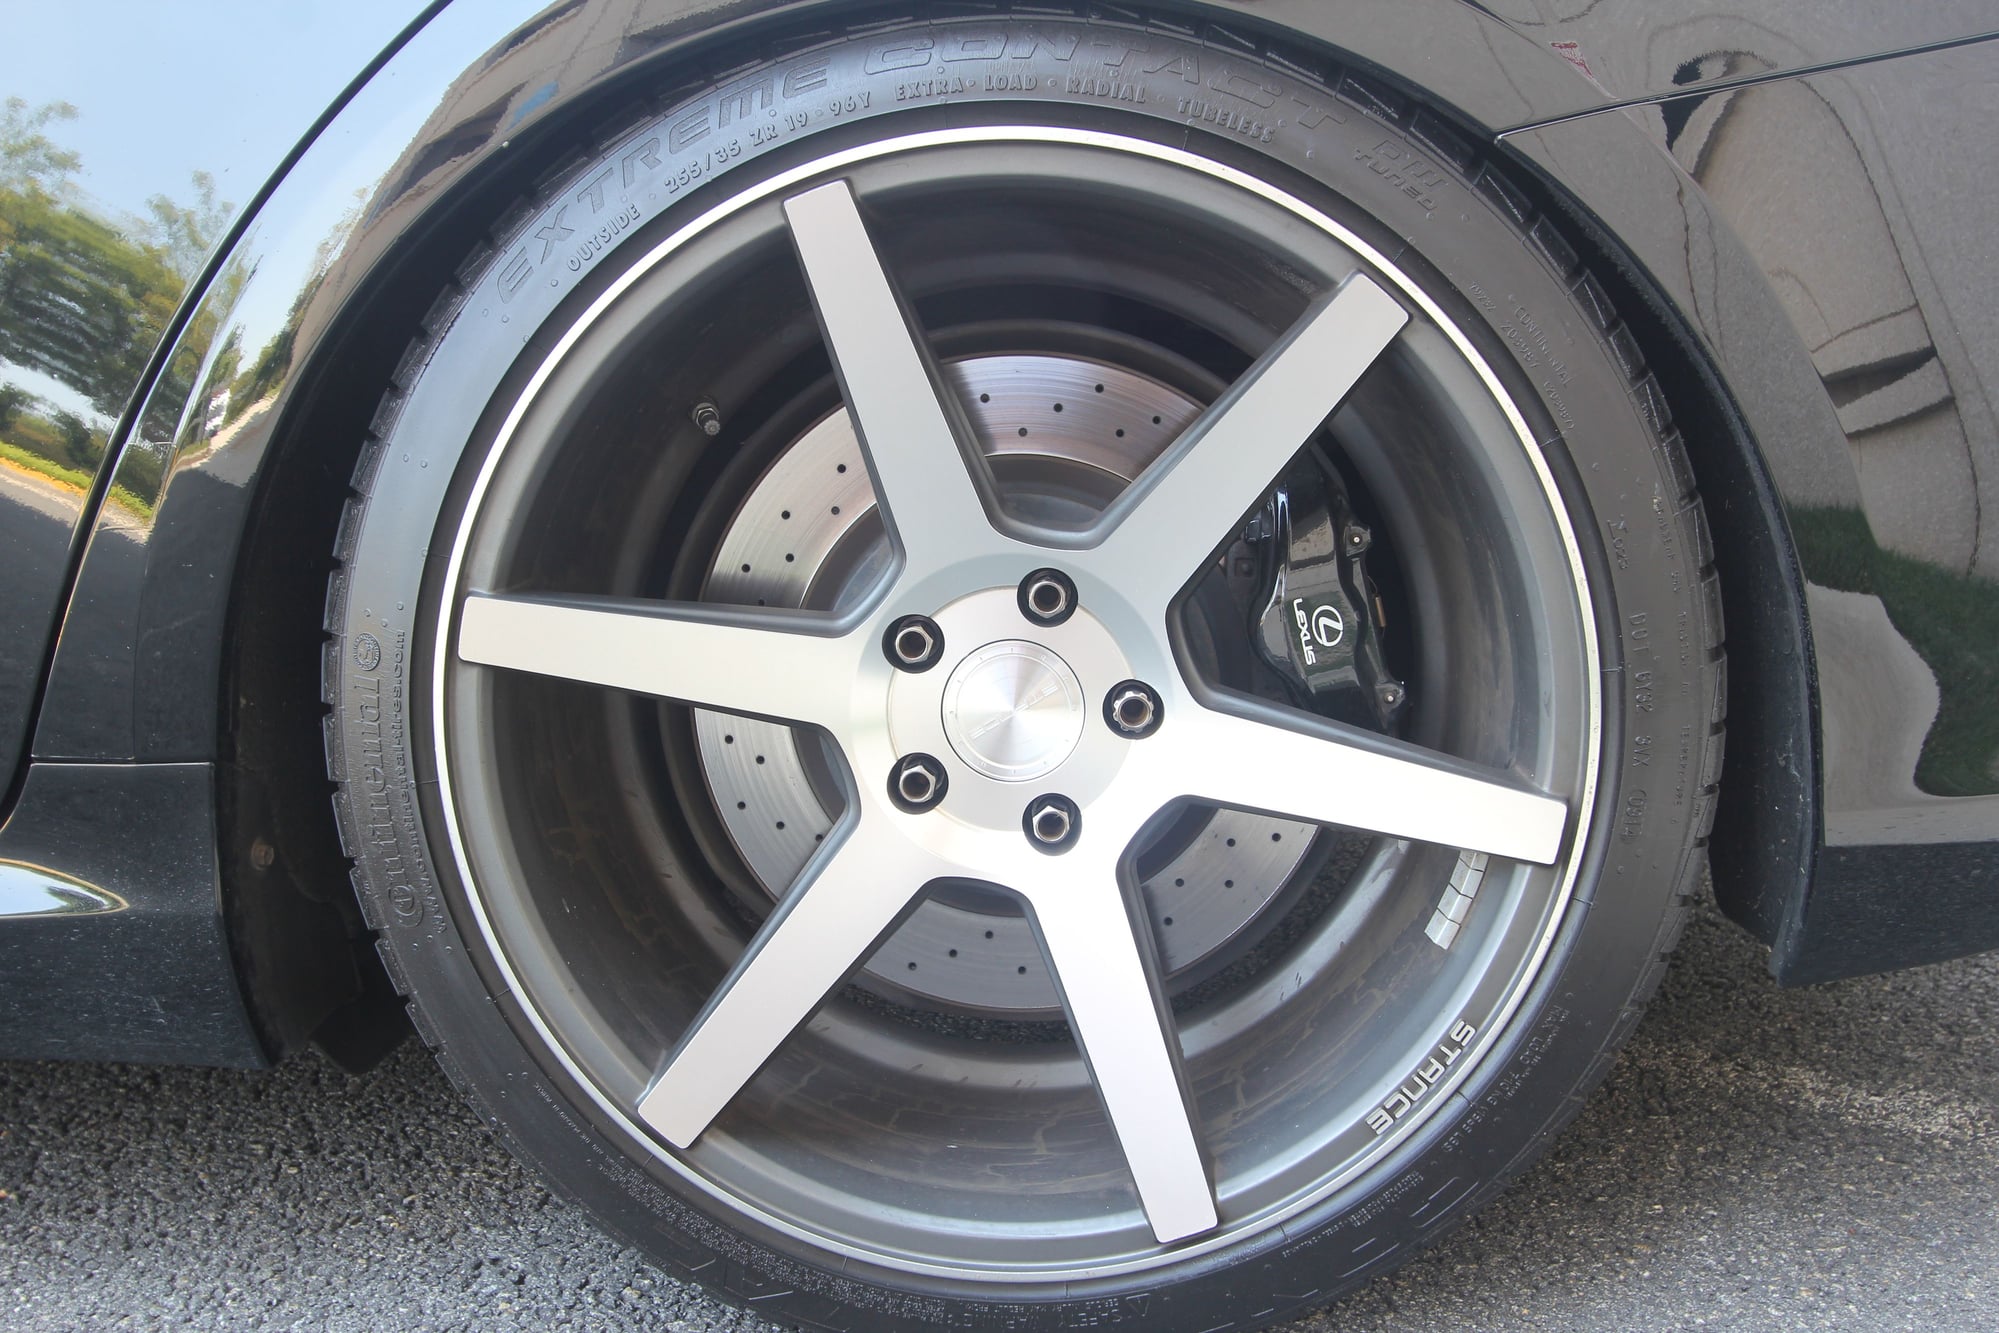 Wheels and Tires/Axles - 19 inch Stance wheels SC6 staggered wheels set - Used - 2008 to 2014 Lexus IS F - Houston, TX 77008, United States